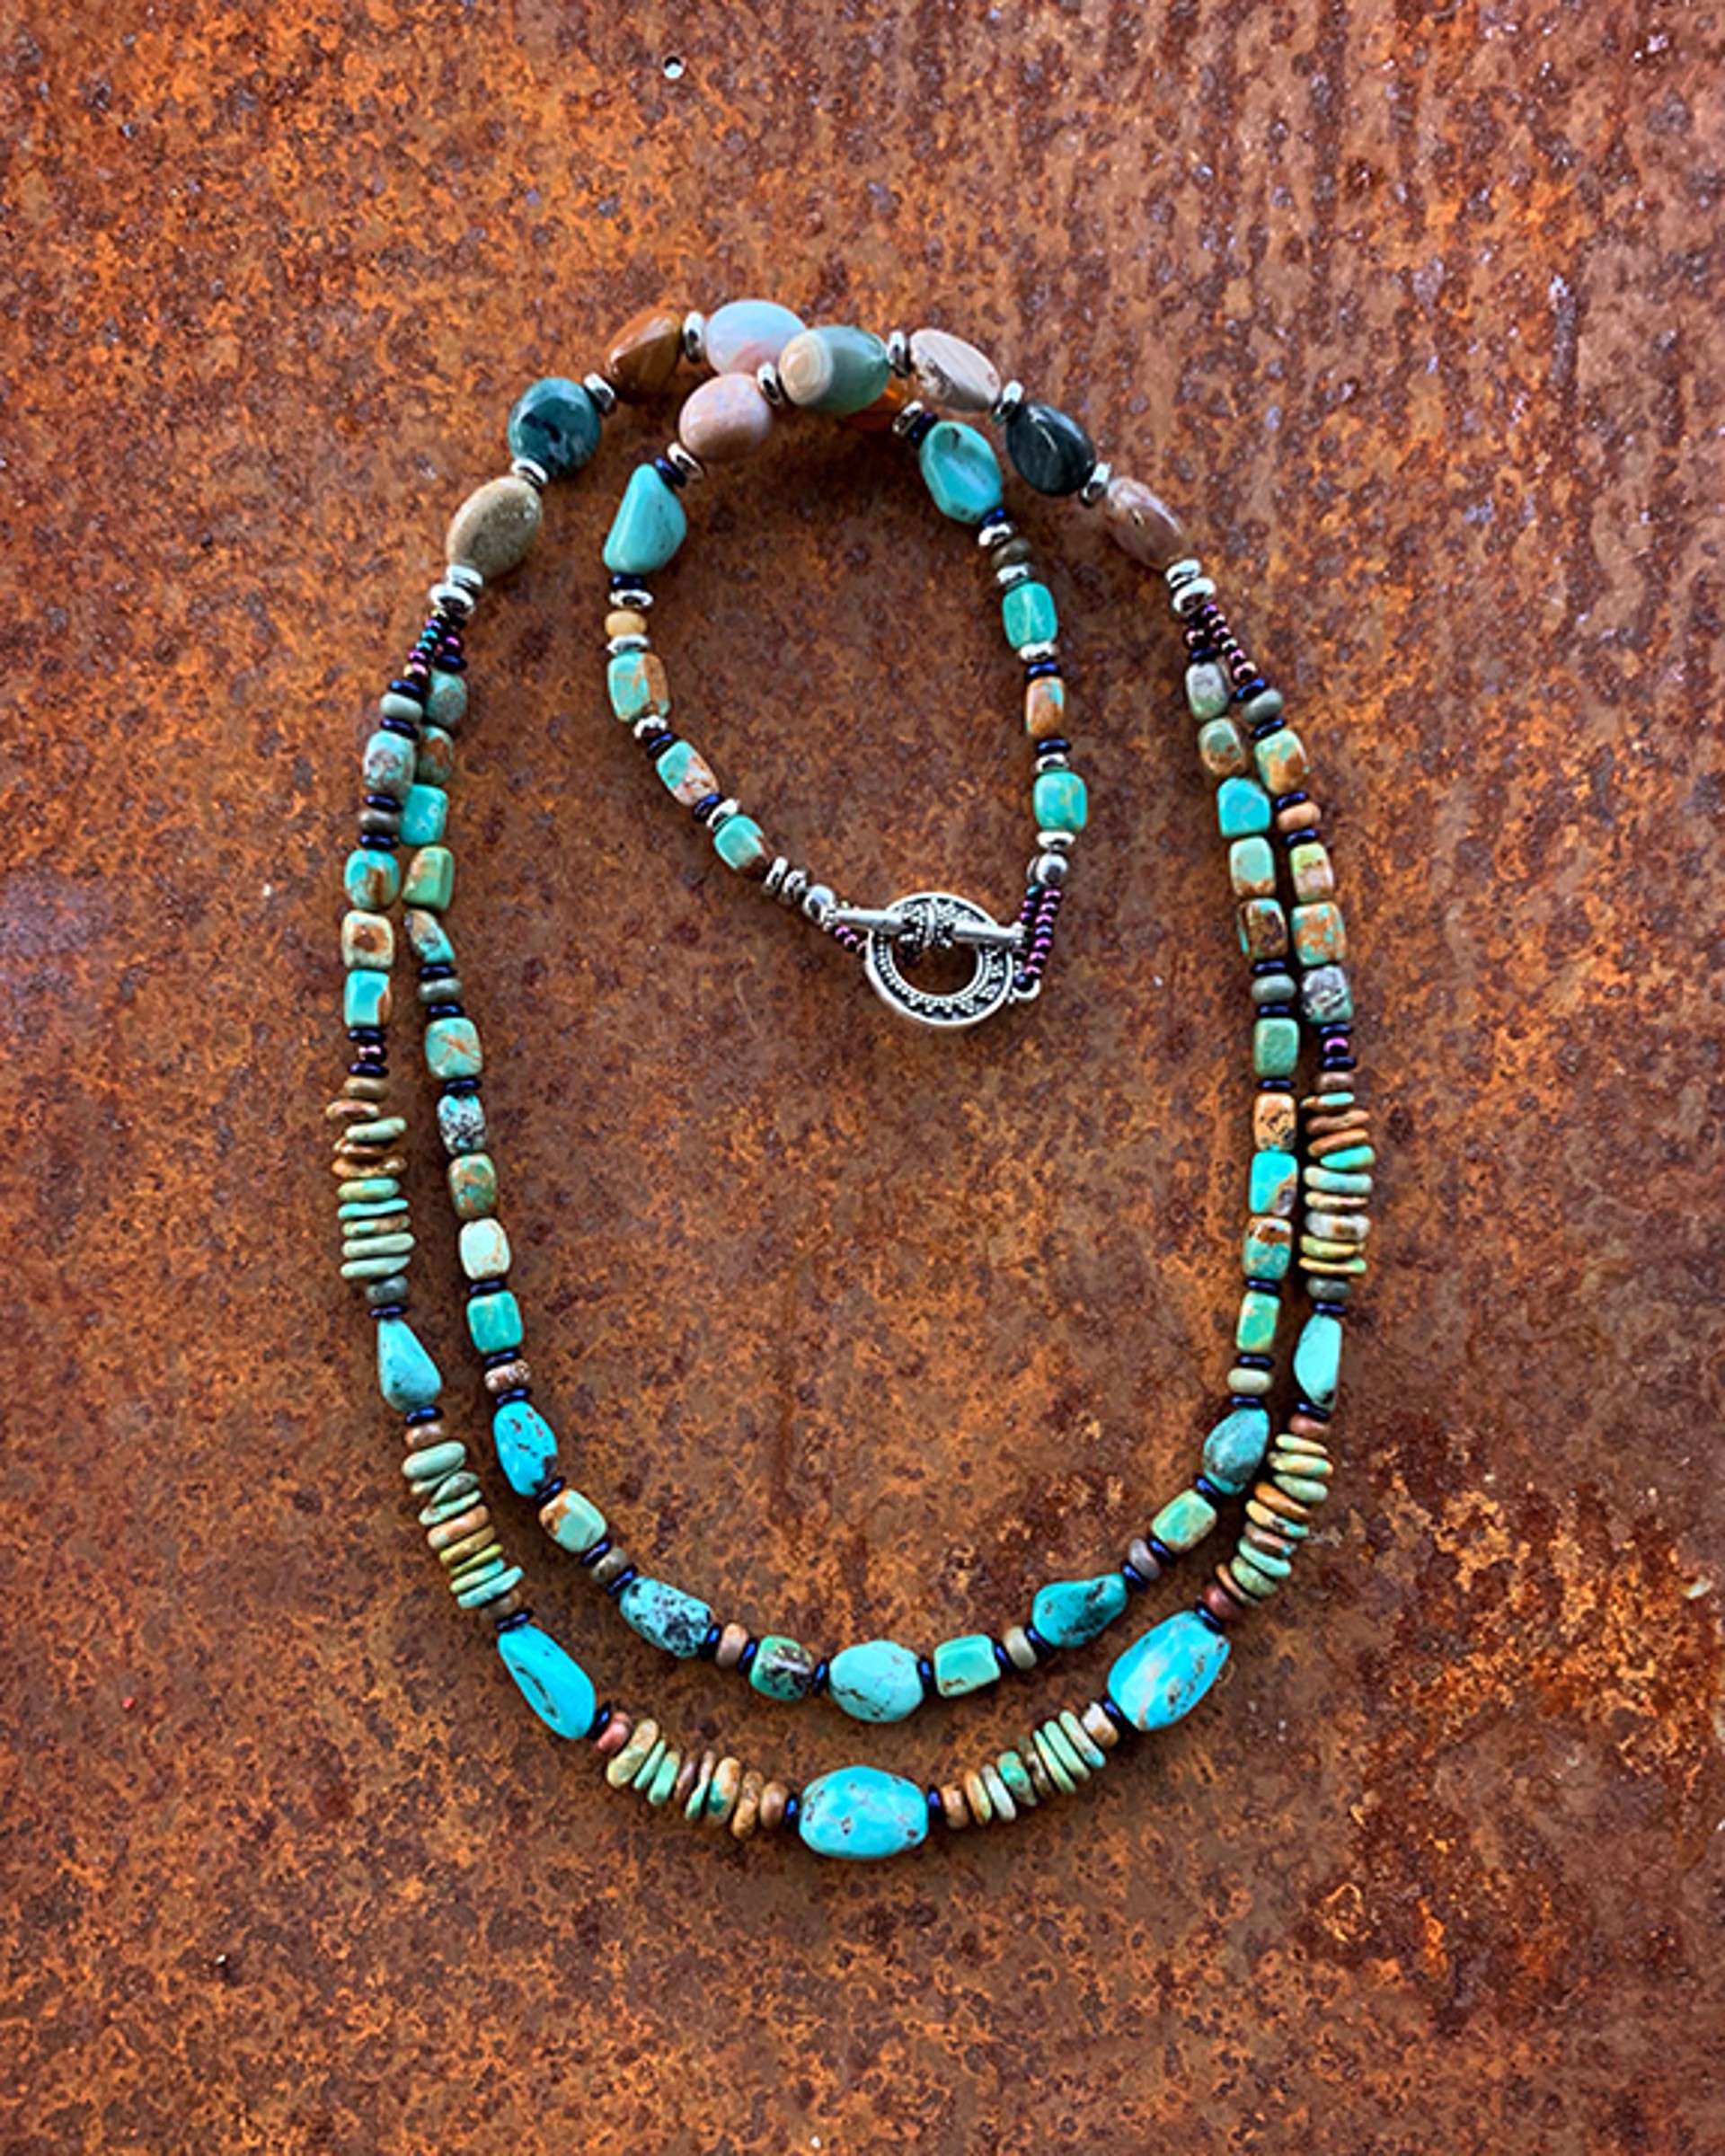 732	Double Strand Turquoise Neclace by Kelly Ormsby